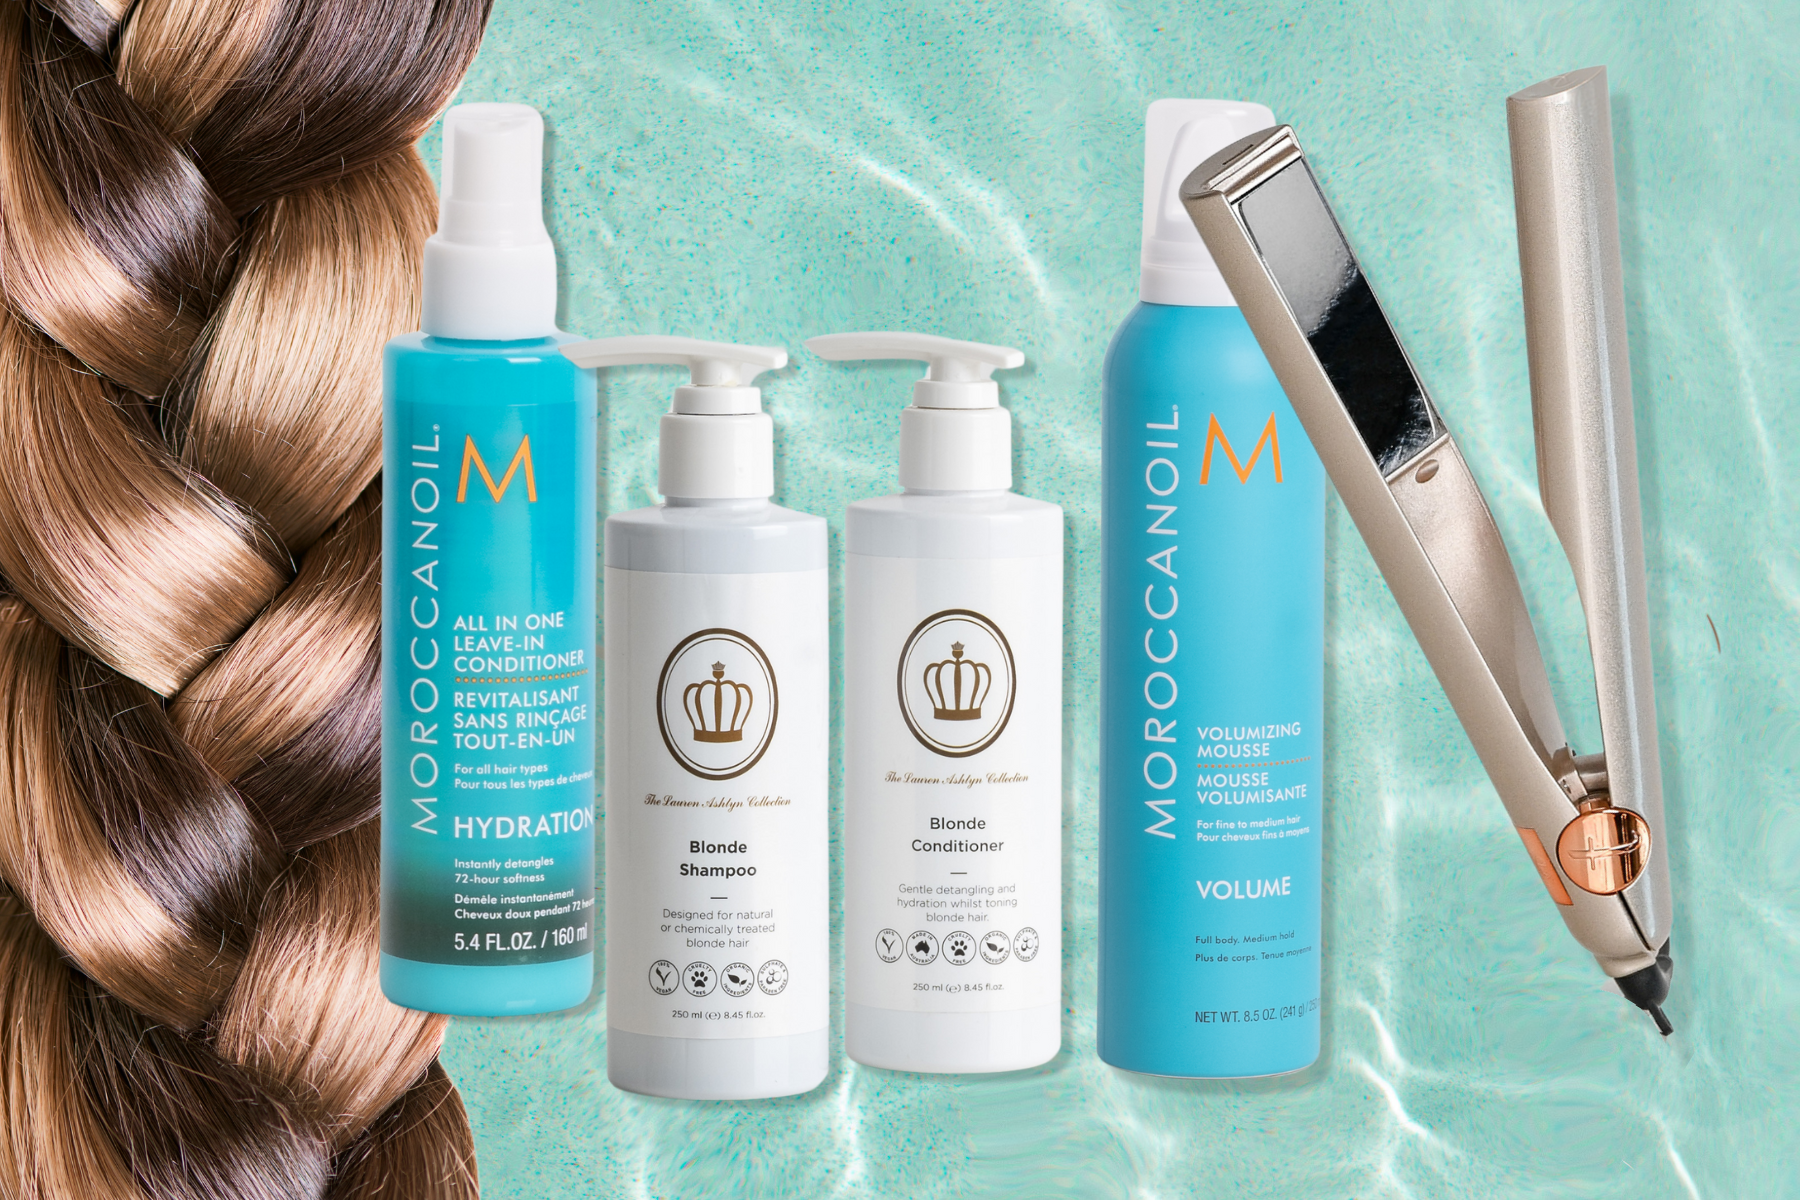 Summer Hair Care: How to Keep Your Locks Lush and Healthy